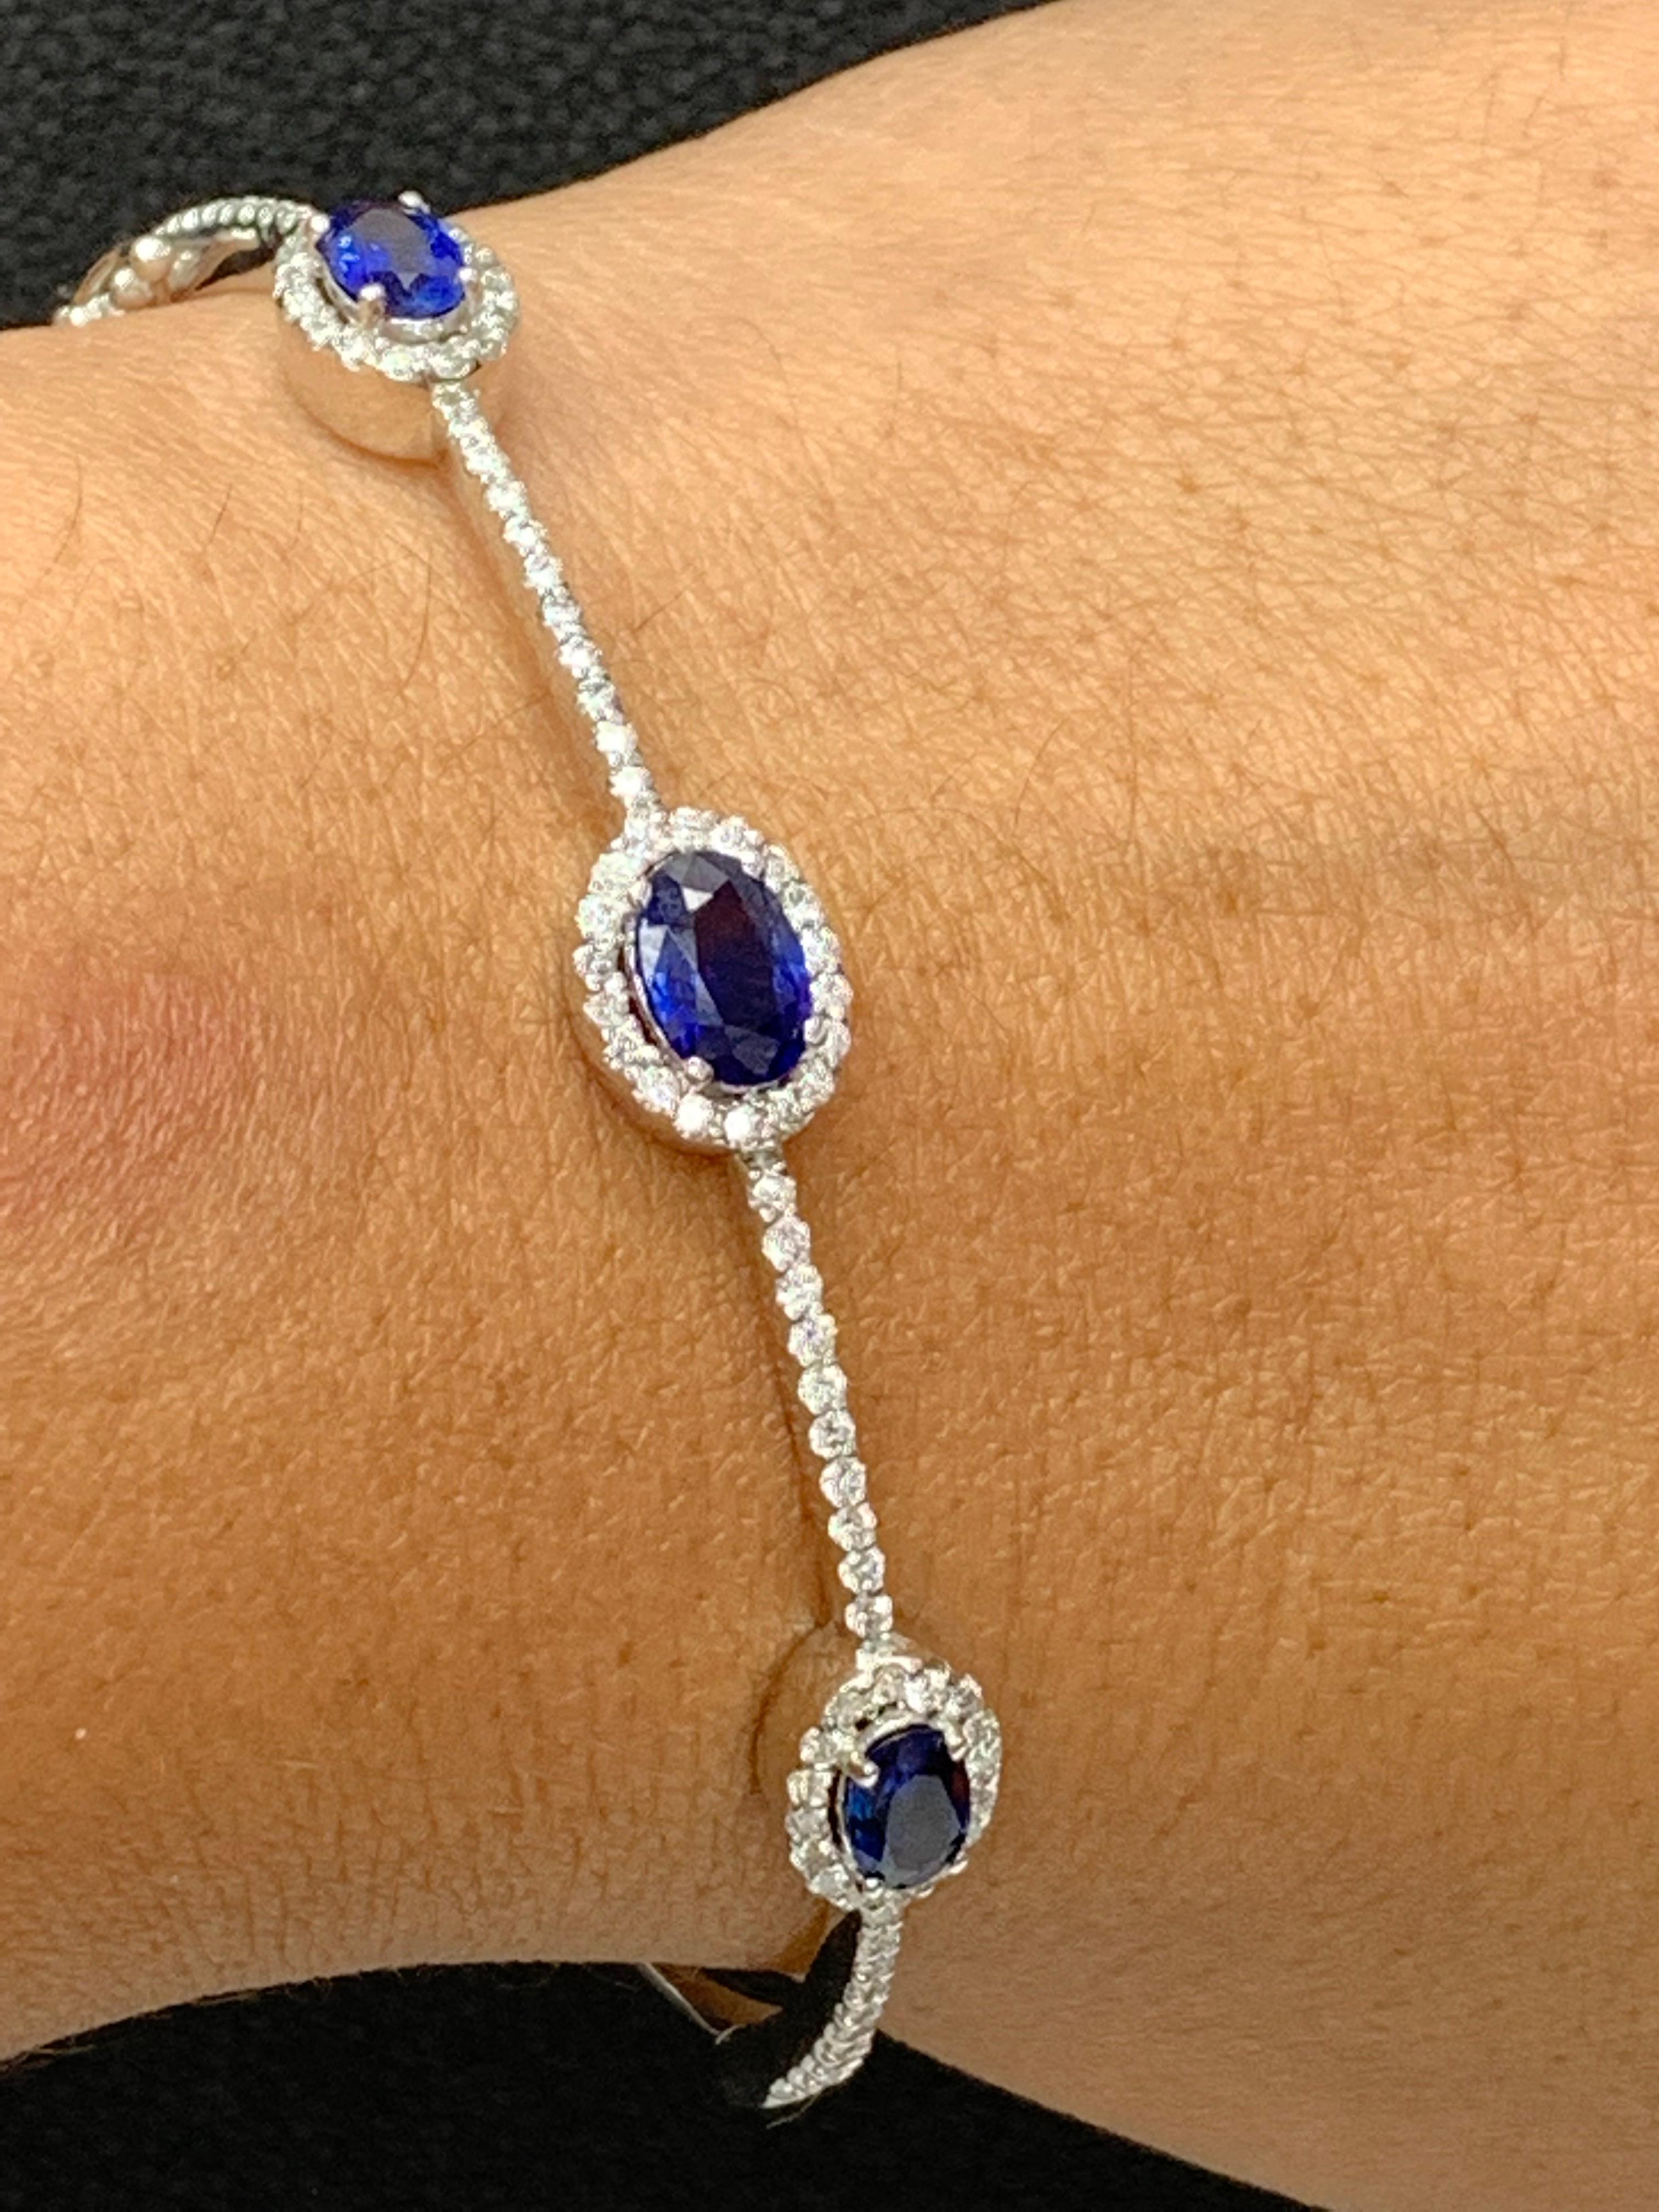 1.80 Carat Oval Cut Sapphire and Diamond Bangle Bracelet in 14K White Gold For Sale 3